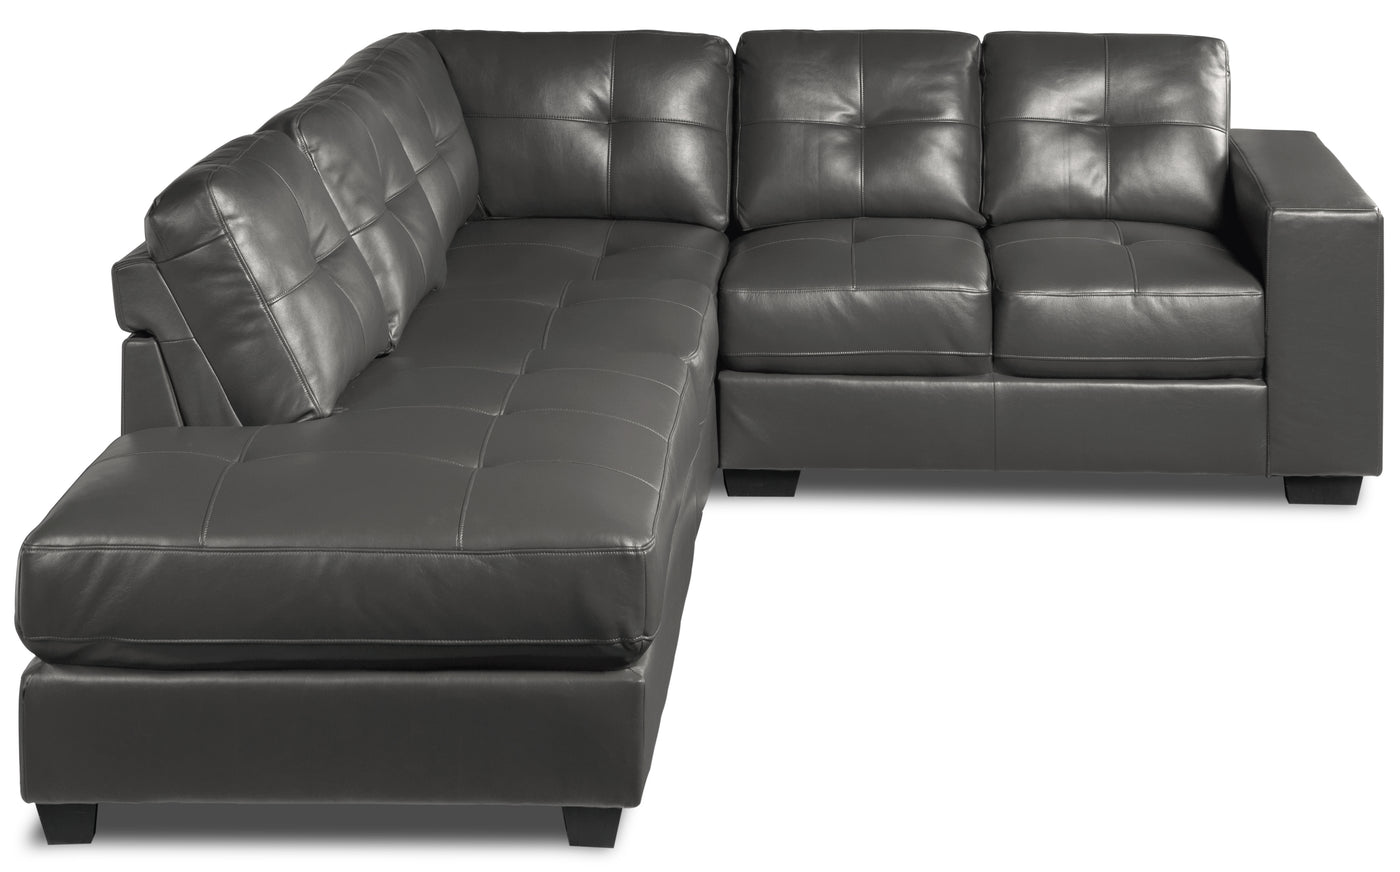 Meldrid 4 Pc. Sectional with Left Facing Chaise - Grey